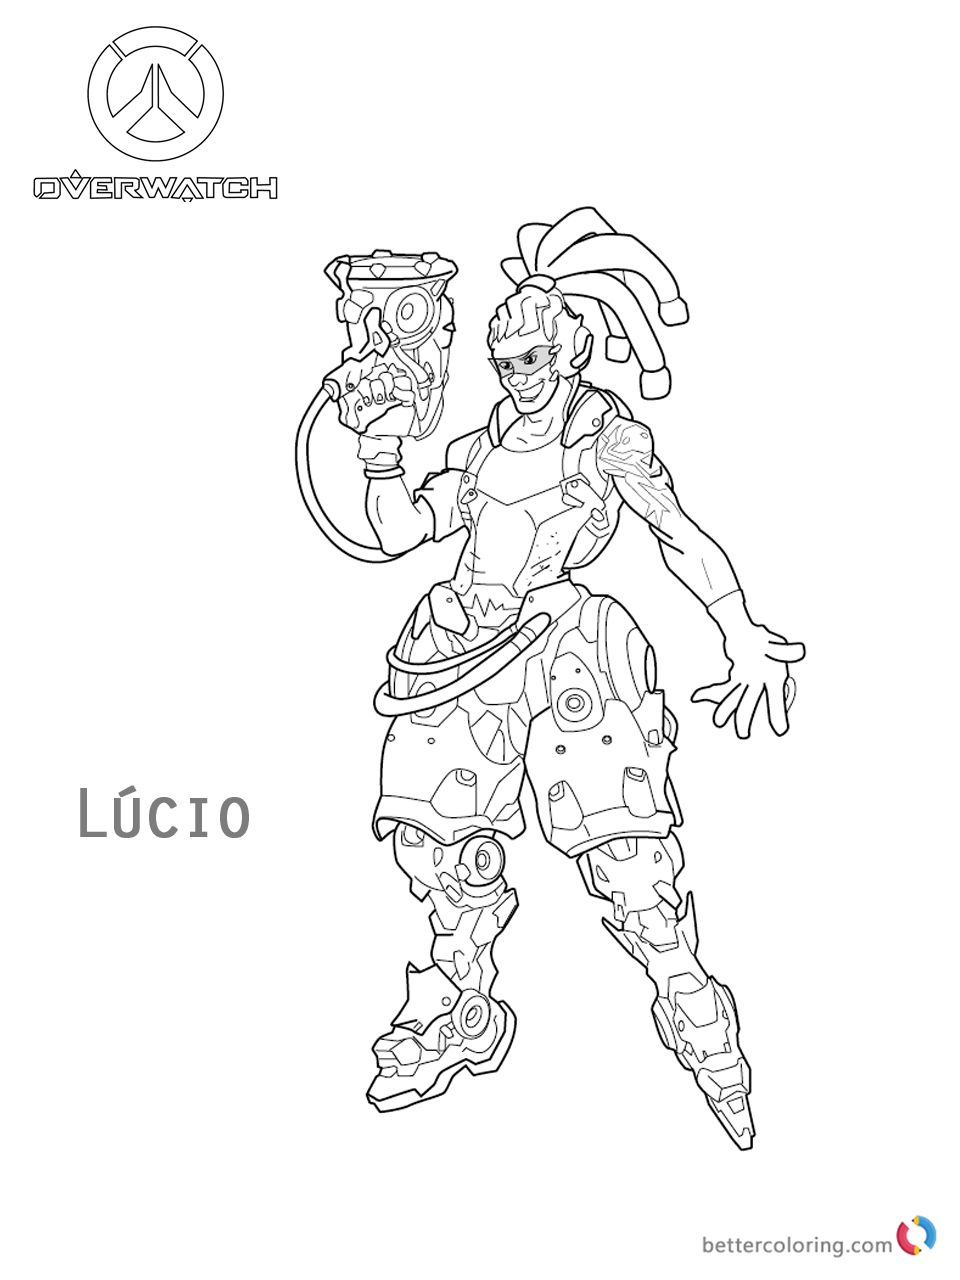 Lucio from Overwatch coloring pages printable